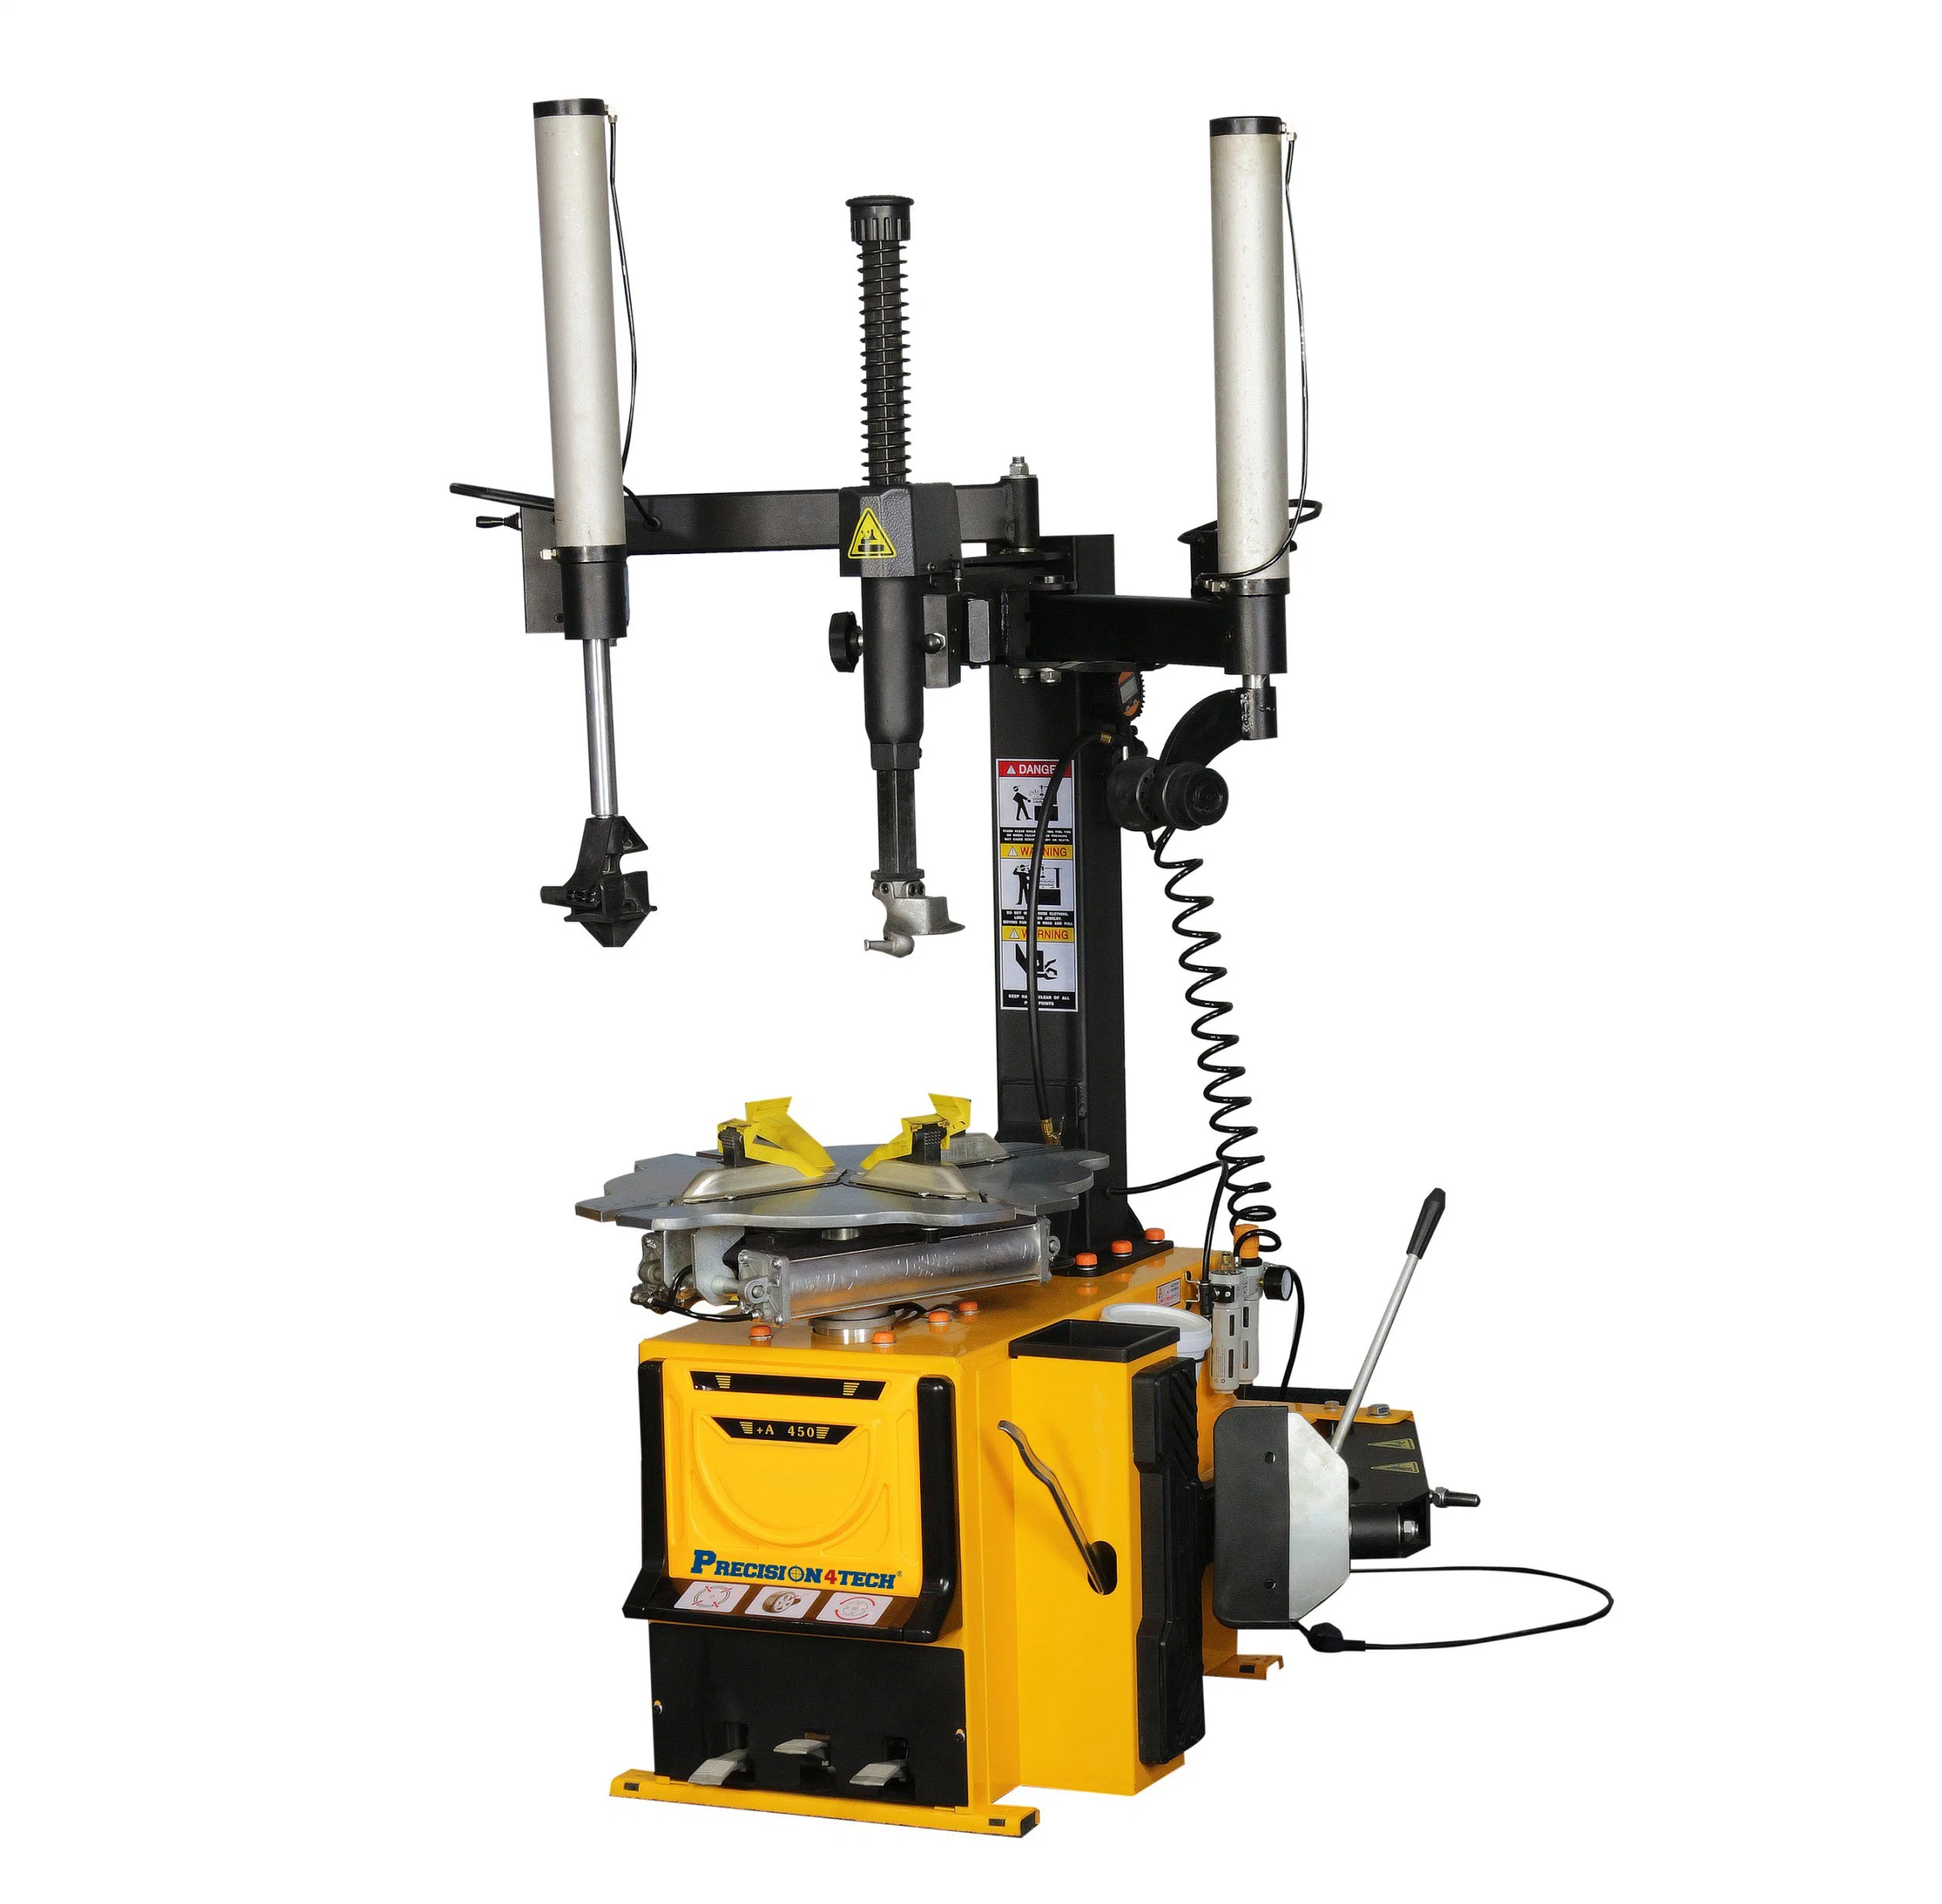 Factory Price Tyre Changing Repairing Semi Automatic Swing Arm 13-25" Tire Changer Machine for Road Service